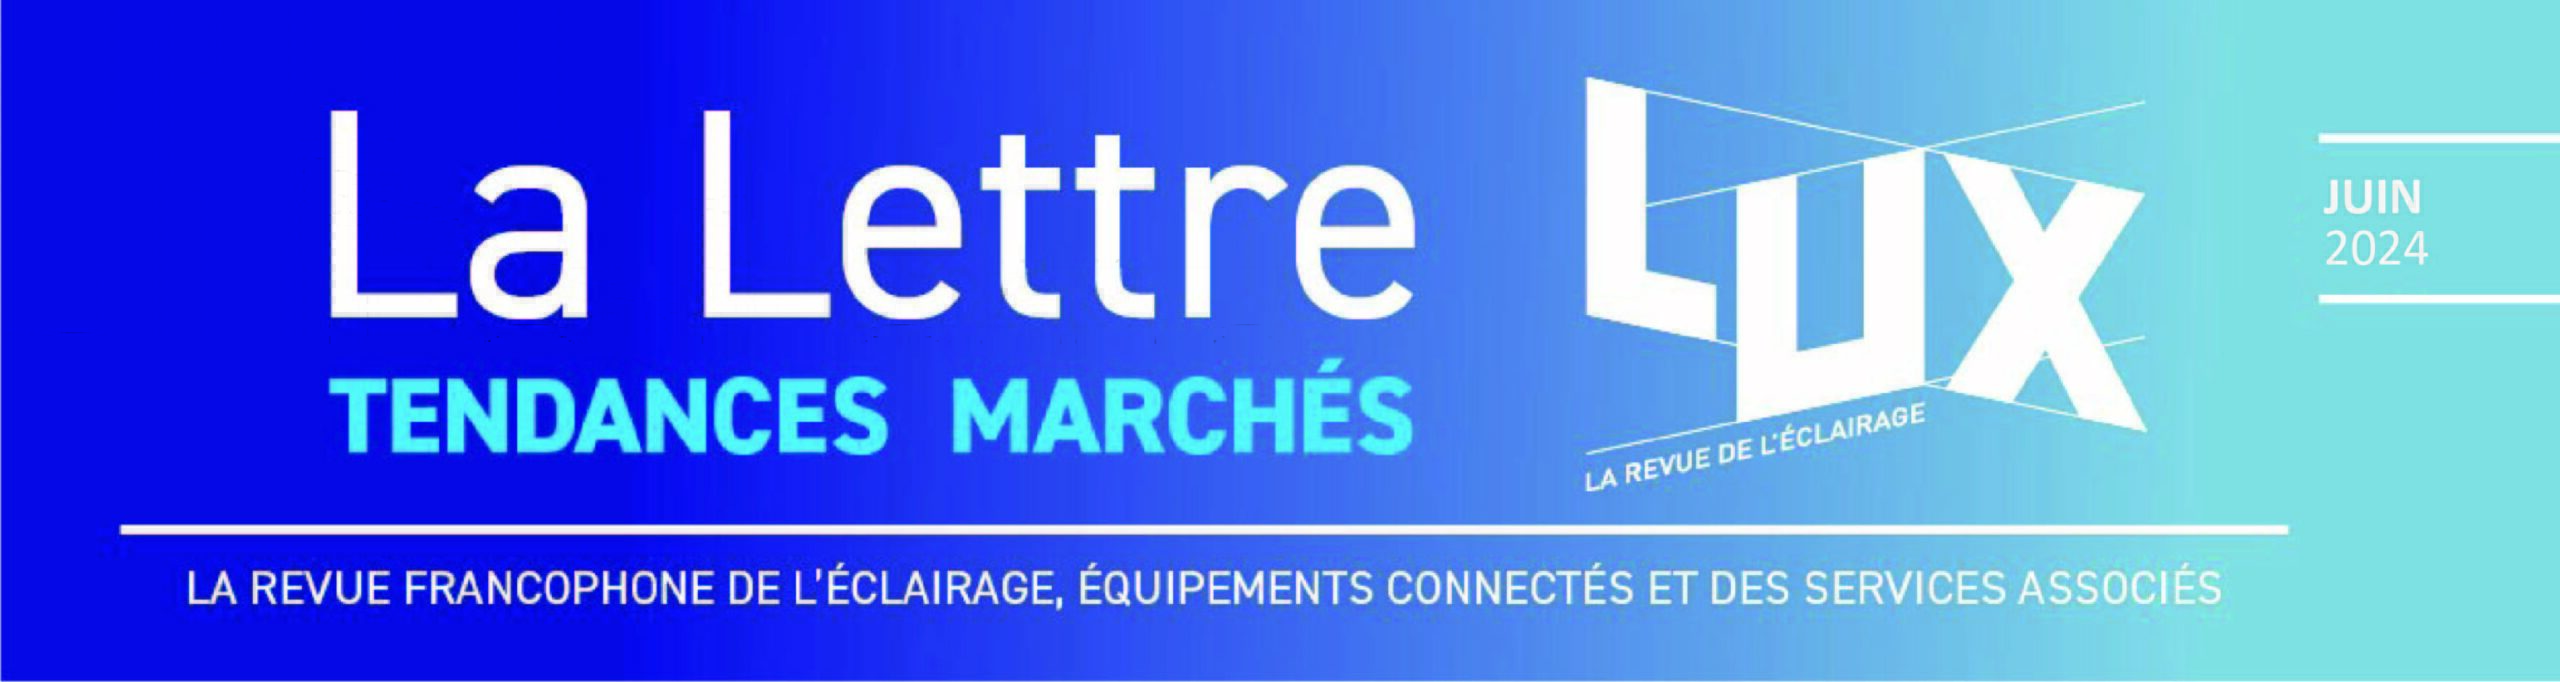 newsletter_LUX_MARCHES_6